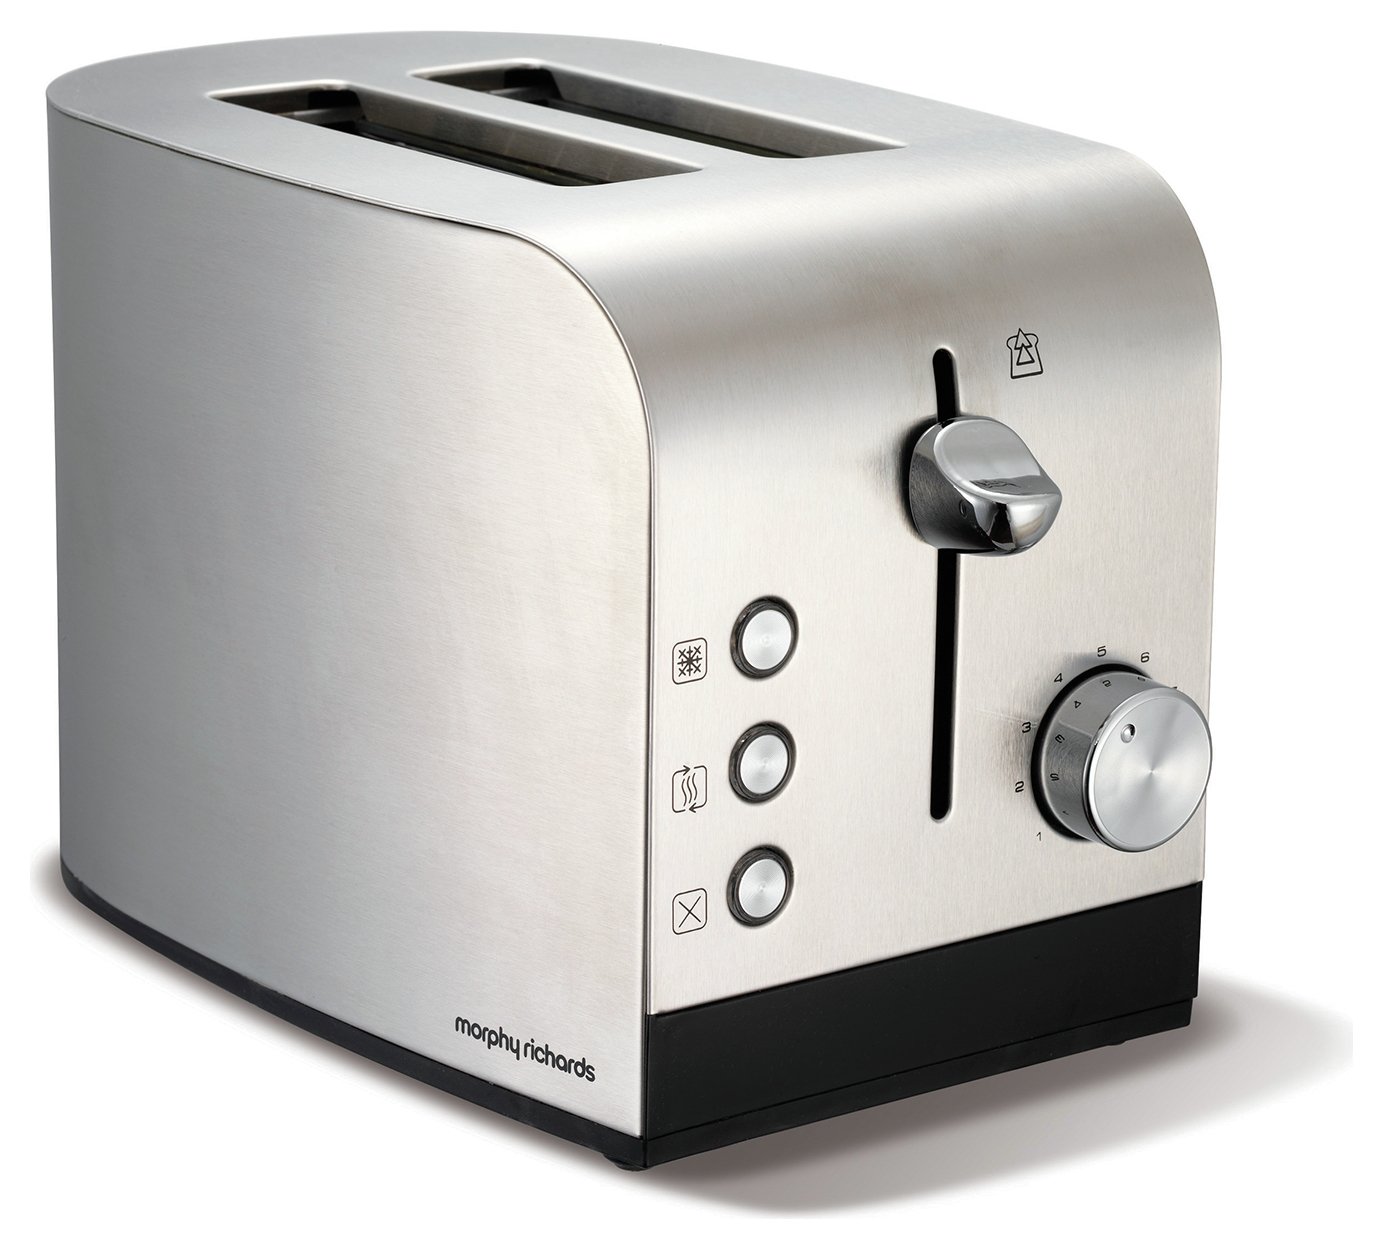 Morphy Richards Equip 44208 2 Slice Toaster-Stainless Steel.